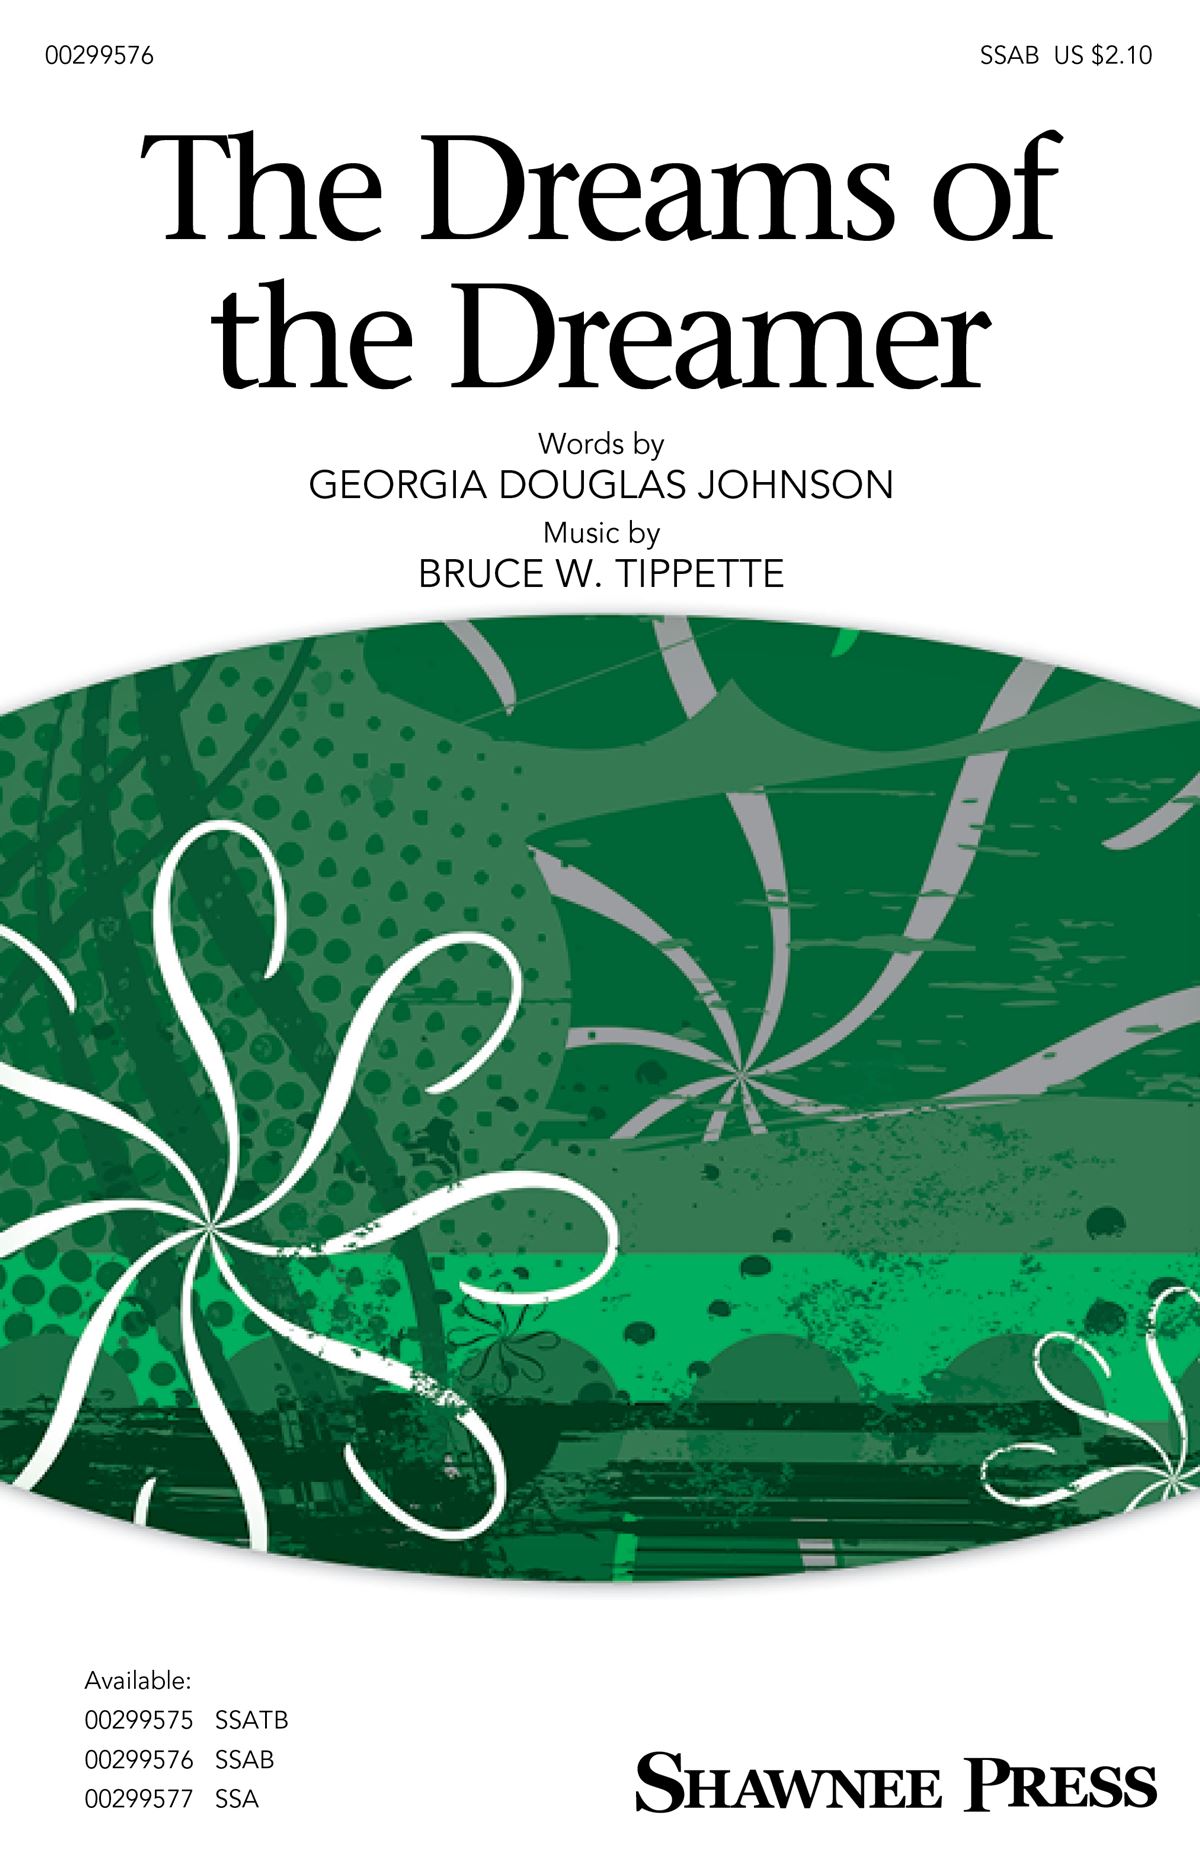 Bruce W. Tippette: The Dreams of the Dreamer: Mixed Choir a Cappella: Vocal